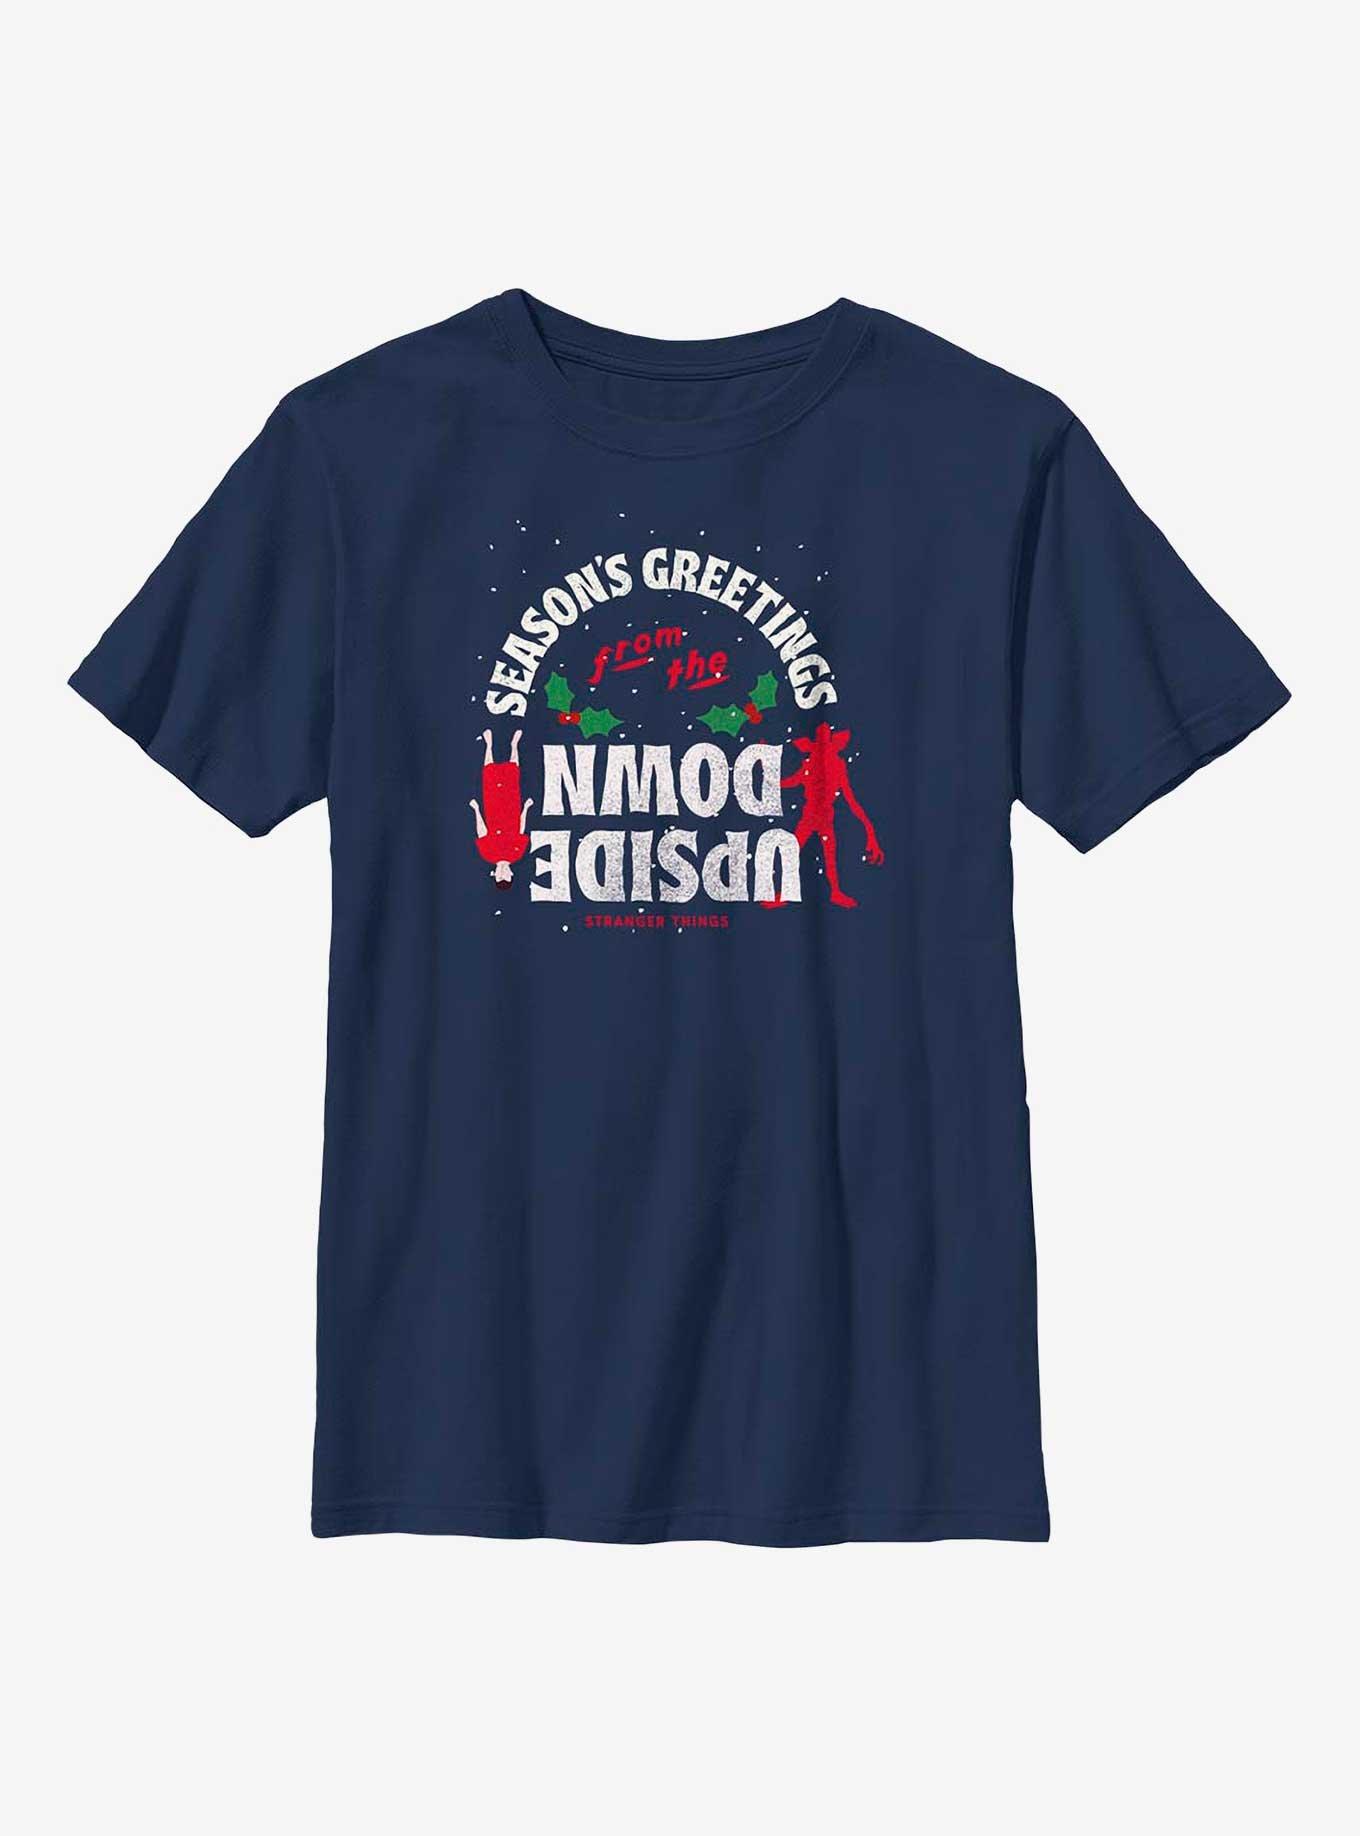 Stranger Things Season's Greetings From The Upside Down Youth T-Shirt, NAVY, hi-res